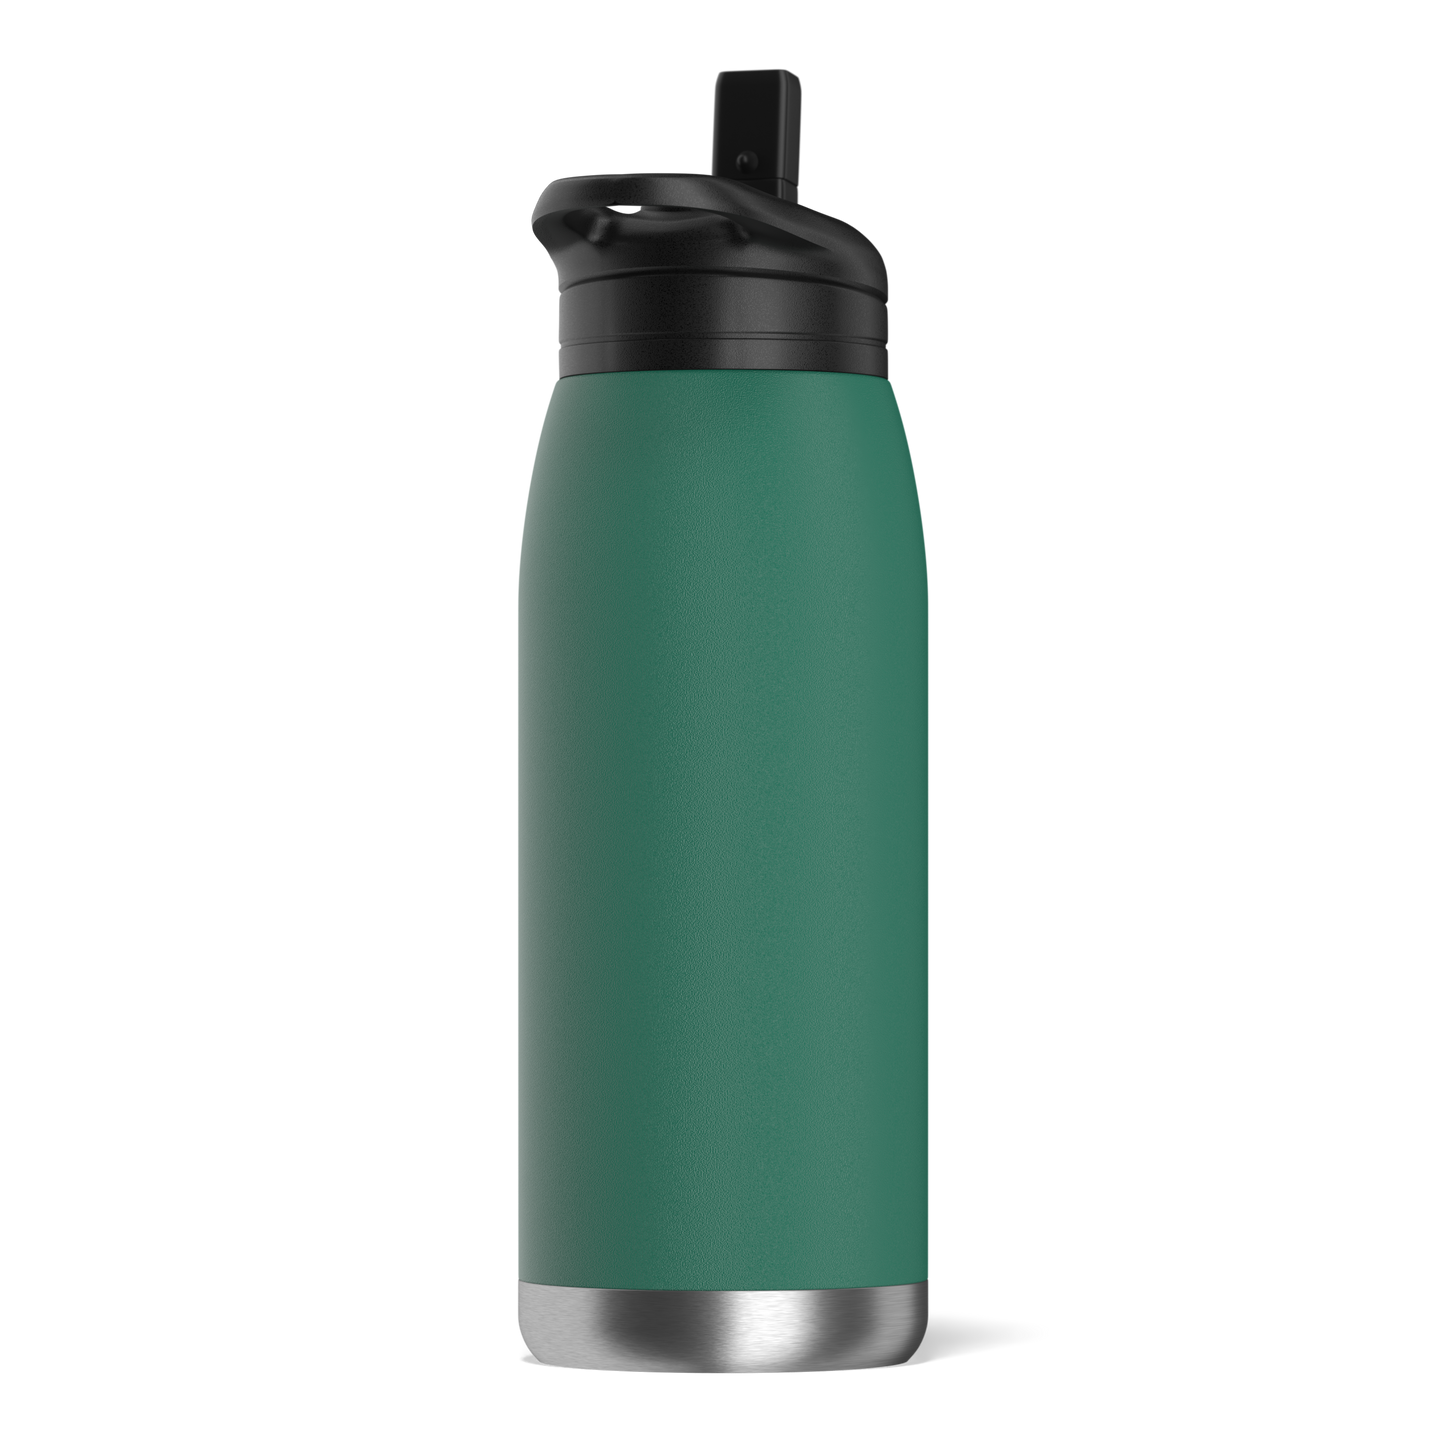 Flow 32oz Stainless Steel Insulated Water Bottle with Straw Lid Bottle- Forest